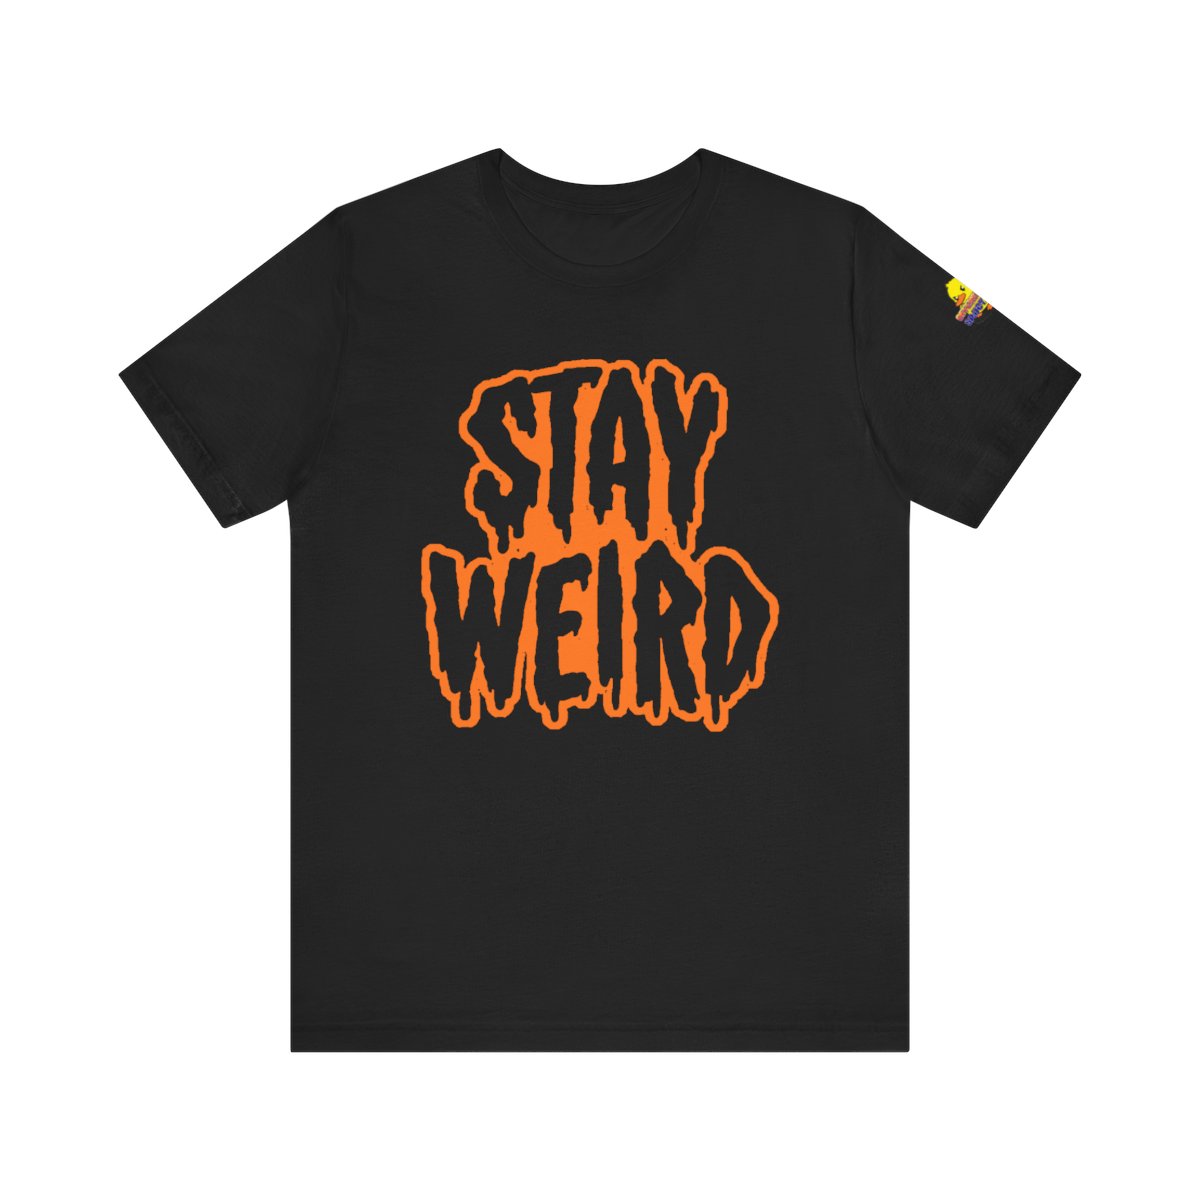 Stay Weird Tee product thumbnail image